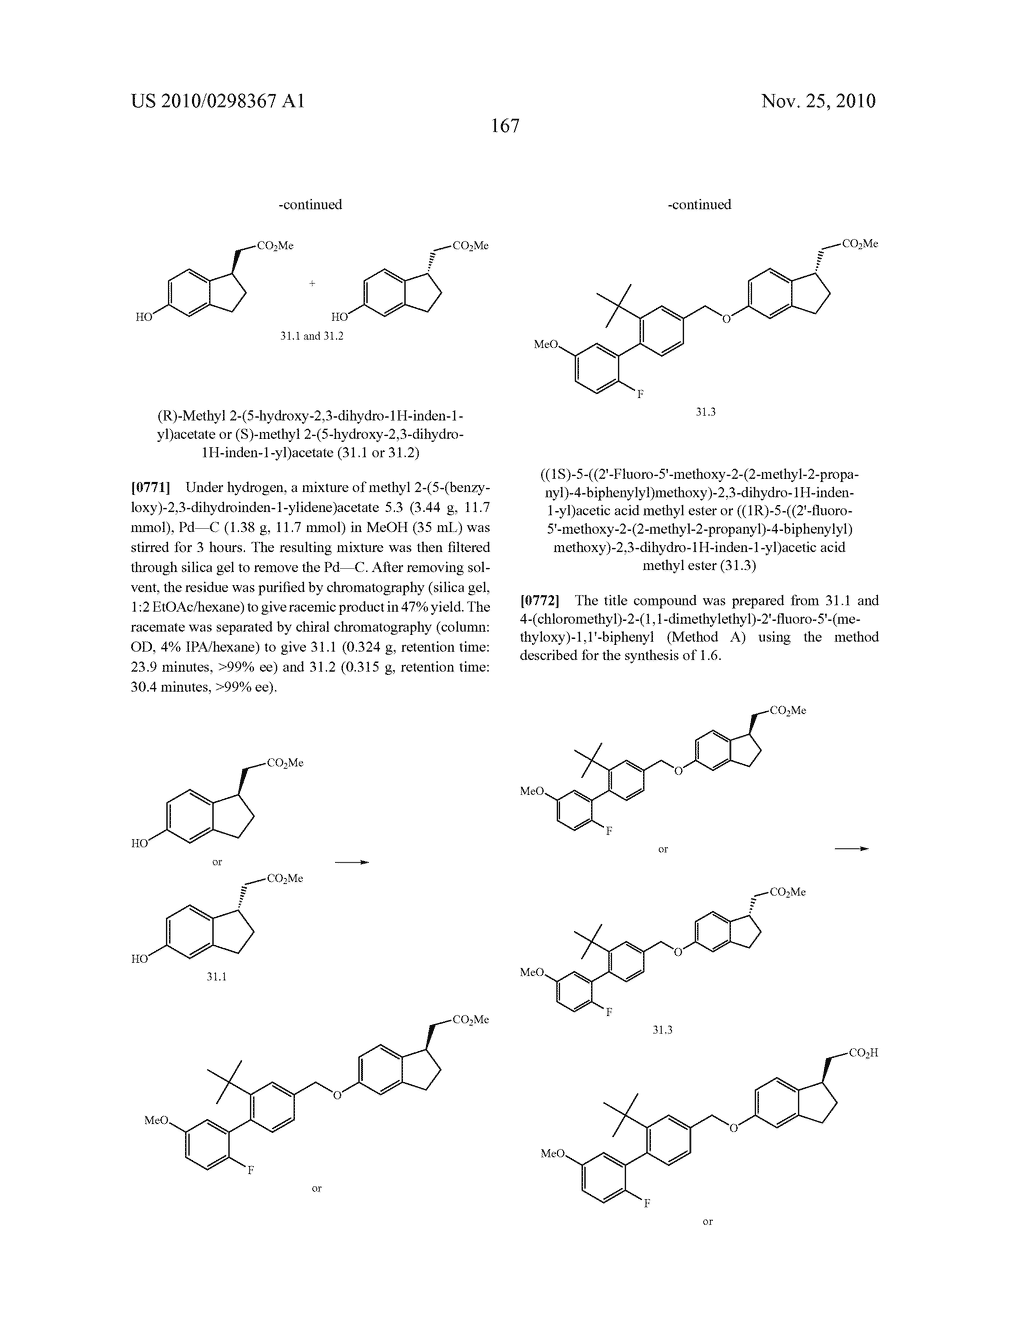 Conformationally Constrained Carboxylic Acid Derivatives Useful for Treating Metabolic Disorders - diagram, schematic, and image 169